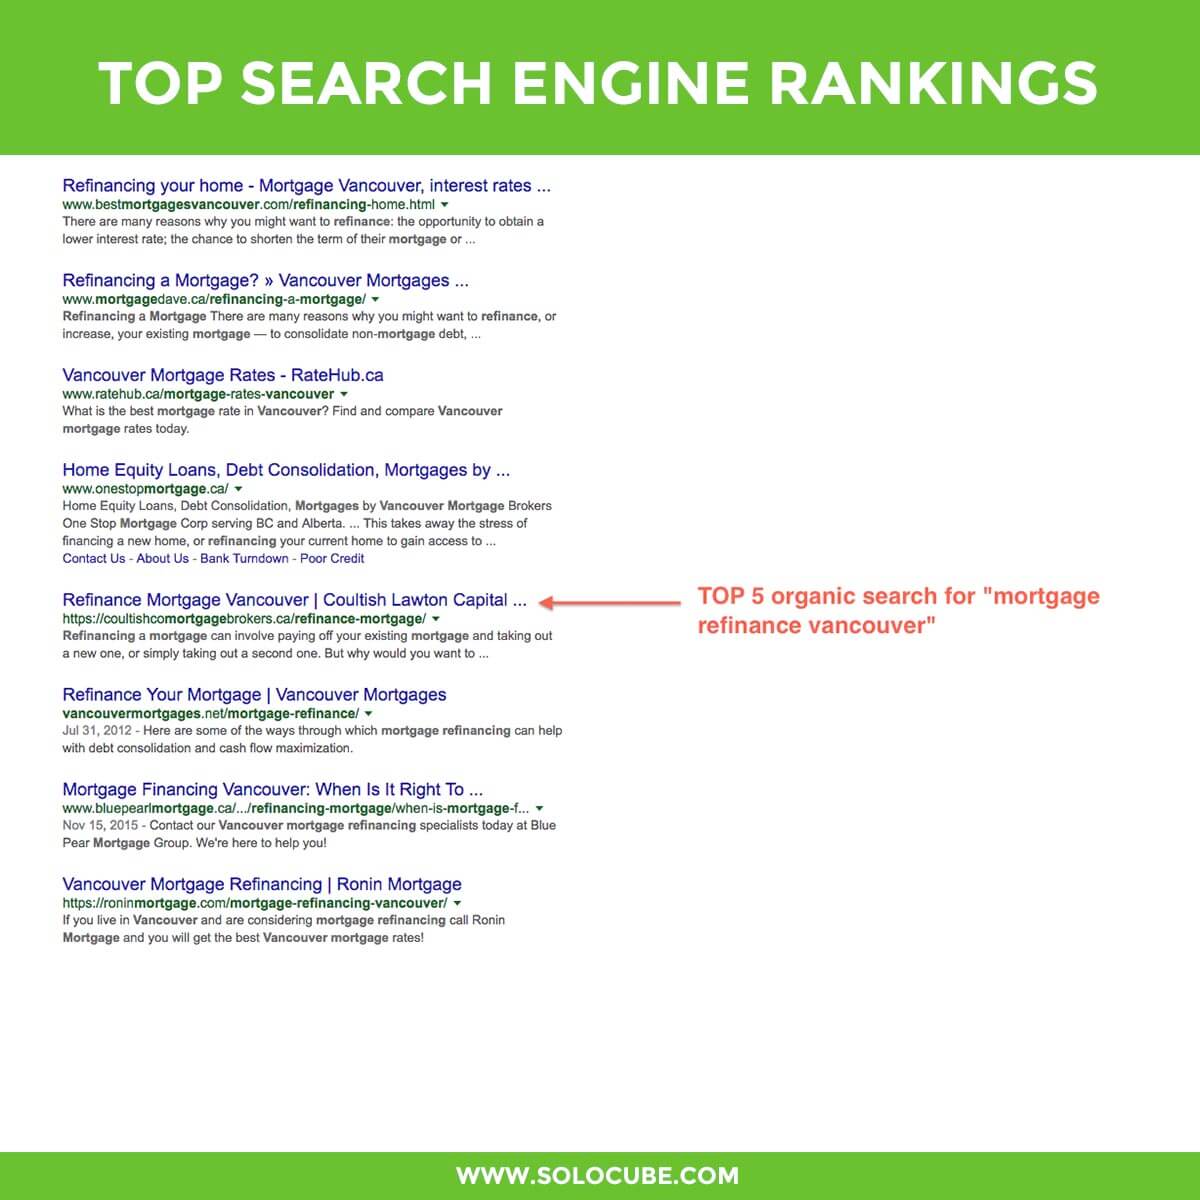 top SEO google ranking by solocube 10 - Vancouver SEO - Search Engine Optimization